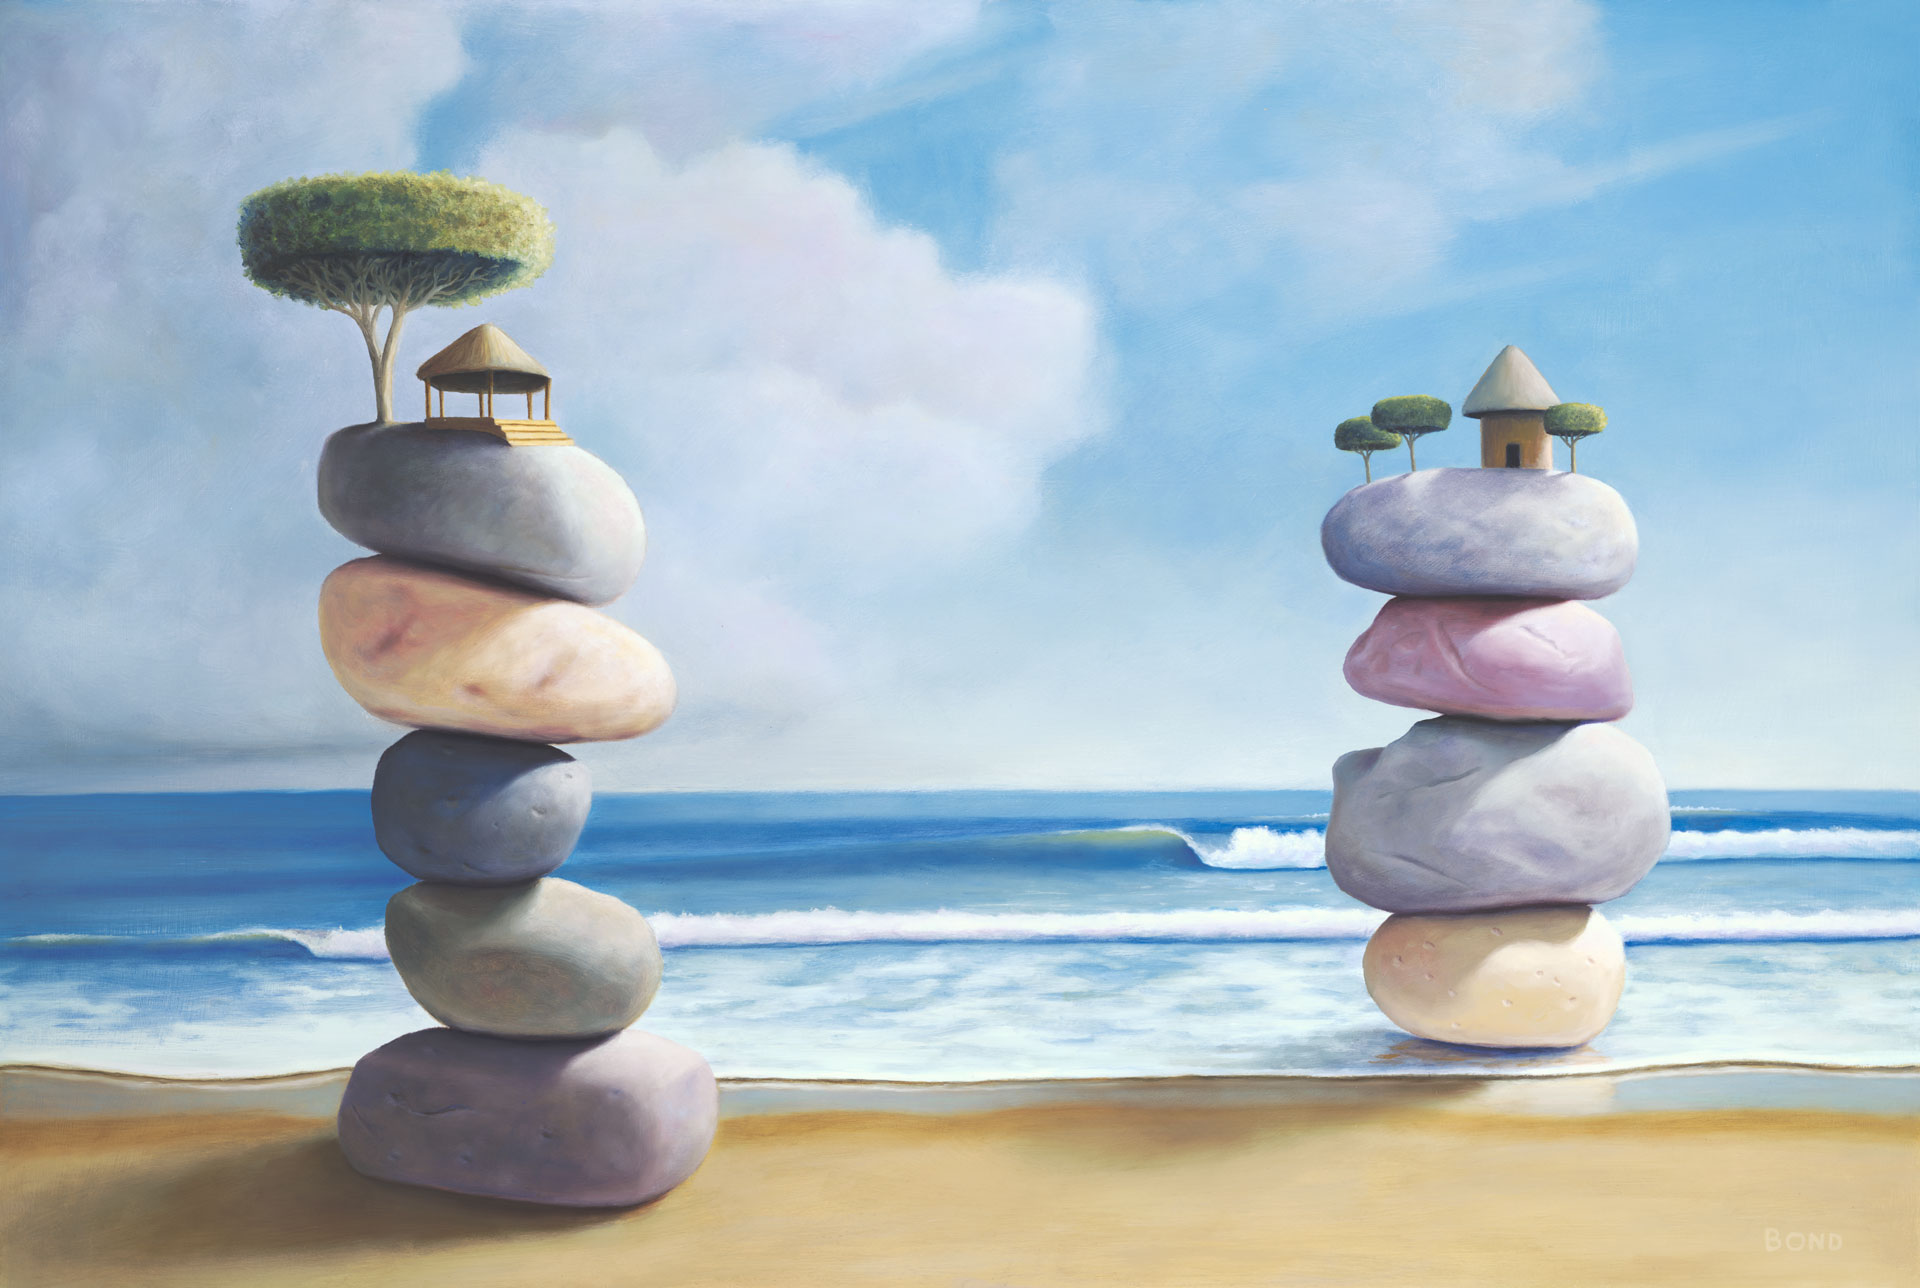 Shelter, painting of two stacked stone structures with grass shack hut and tree on the beach, painting meaning about relationship wisdom happiness, art wtih stacked rock stones, art with stacked cairn, zen art, art about balance joy and community, painting depicting huts as homes, beach art with  ocean water, art with waves and clouds, soulful uplifting inspirational art, soul stirring illusion art, romantic art,  surrealism, surreal art, dreamlike imagery, fanciful art, fantasy art, dreamscape visual, metaphysical art, spiritual painting, metaphysical painting, spiritual art, whimsical art, whimsy art, dream art, fantastic realism art, magic realism oil painting by Paul Bond